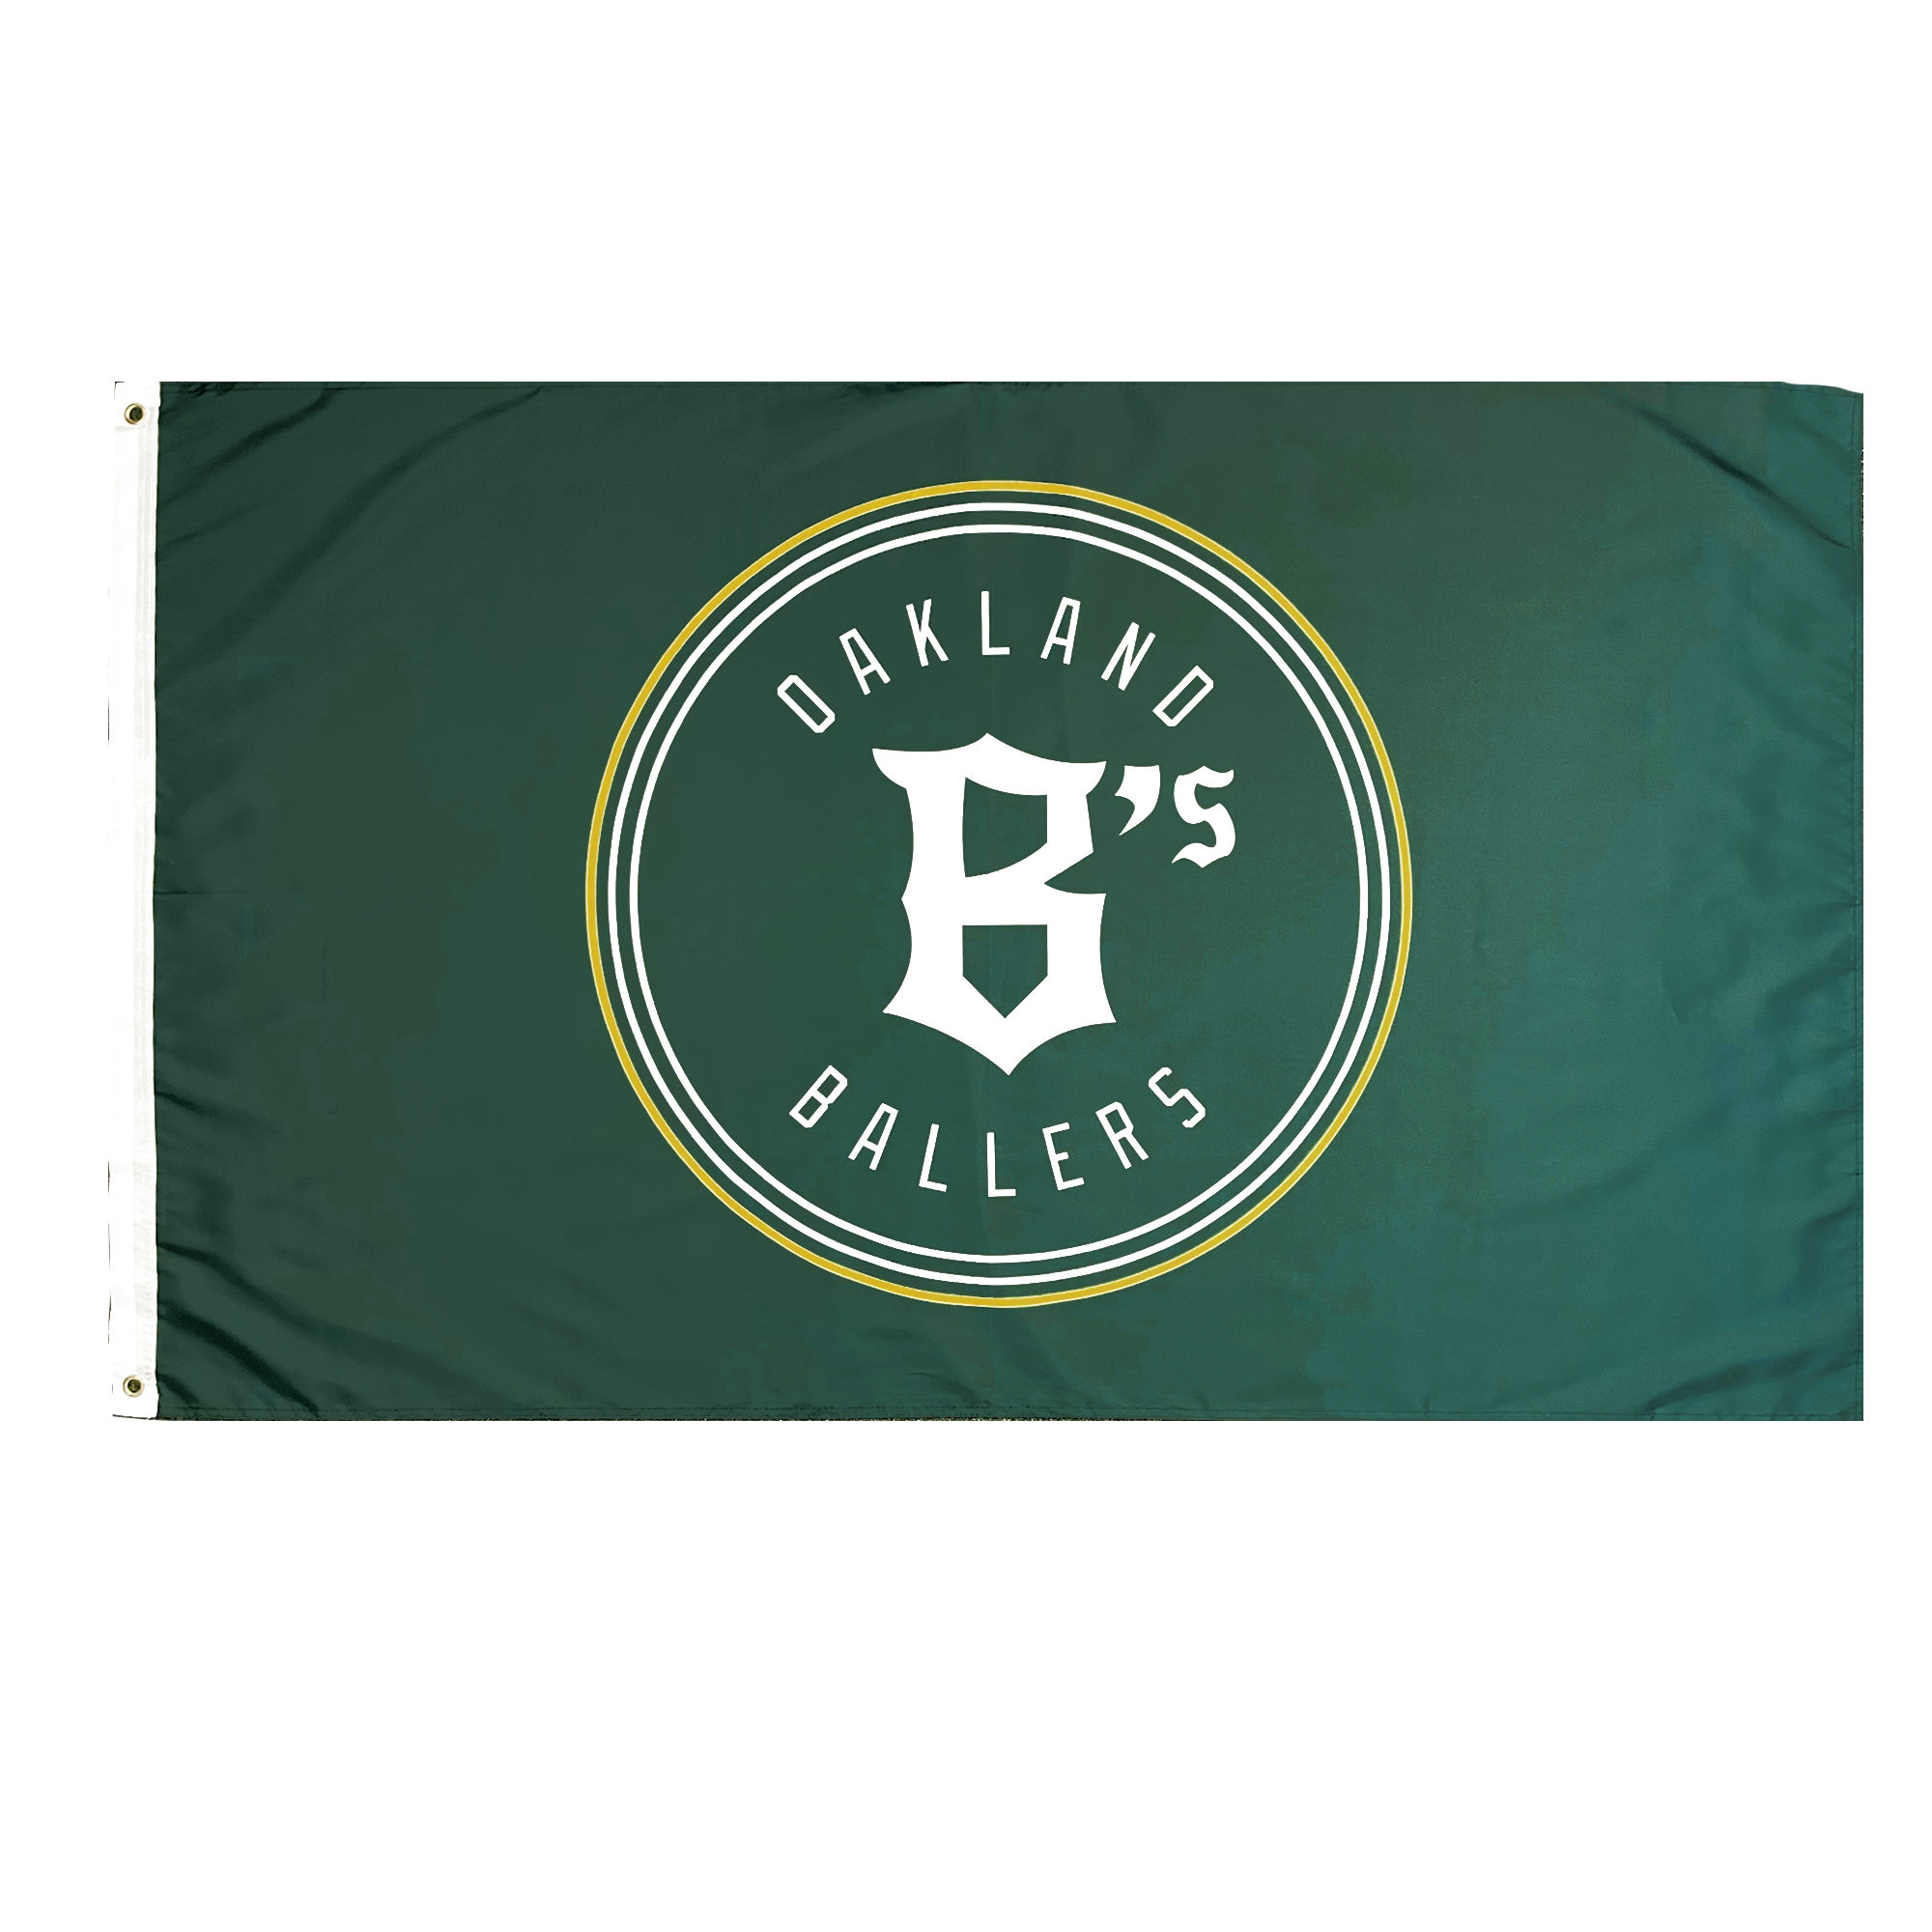 Forest flag with Oakland Ballers logo in center.